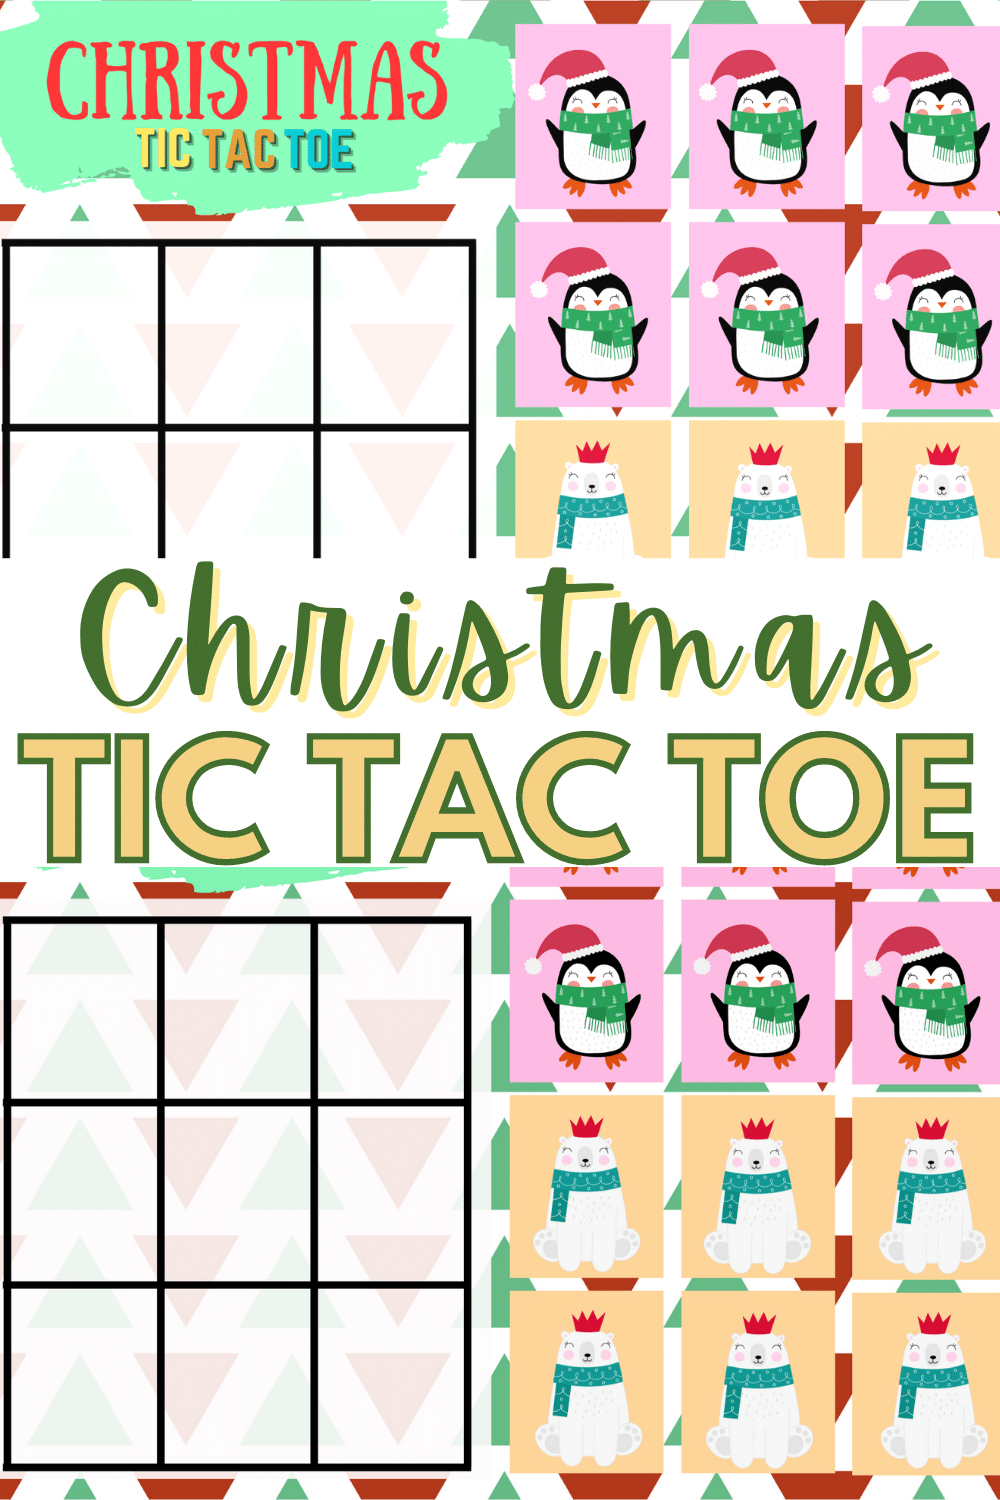 The kids will have a blast challenging you with this Christmas Tic Tac Toe game! Who will be the winner? You'll have to play to find out! #christmas #tictactoe #game #forkids #freeprintable via @wondermomwannab